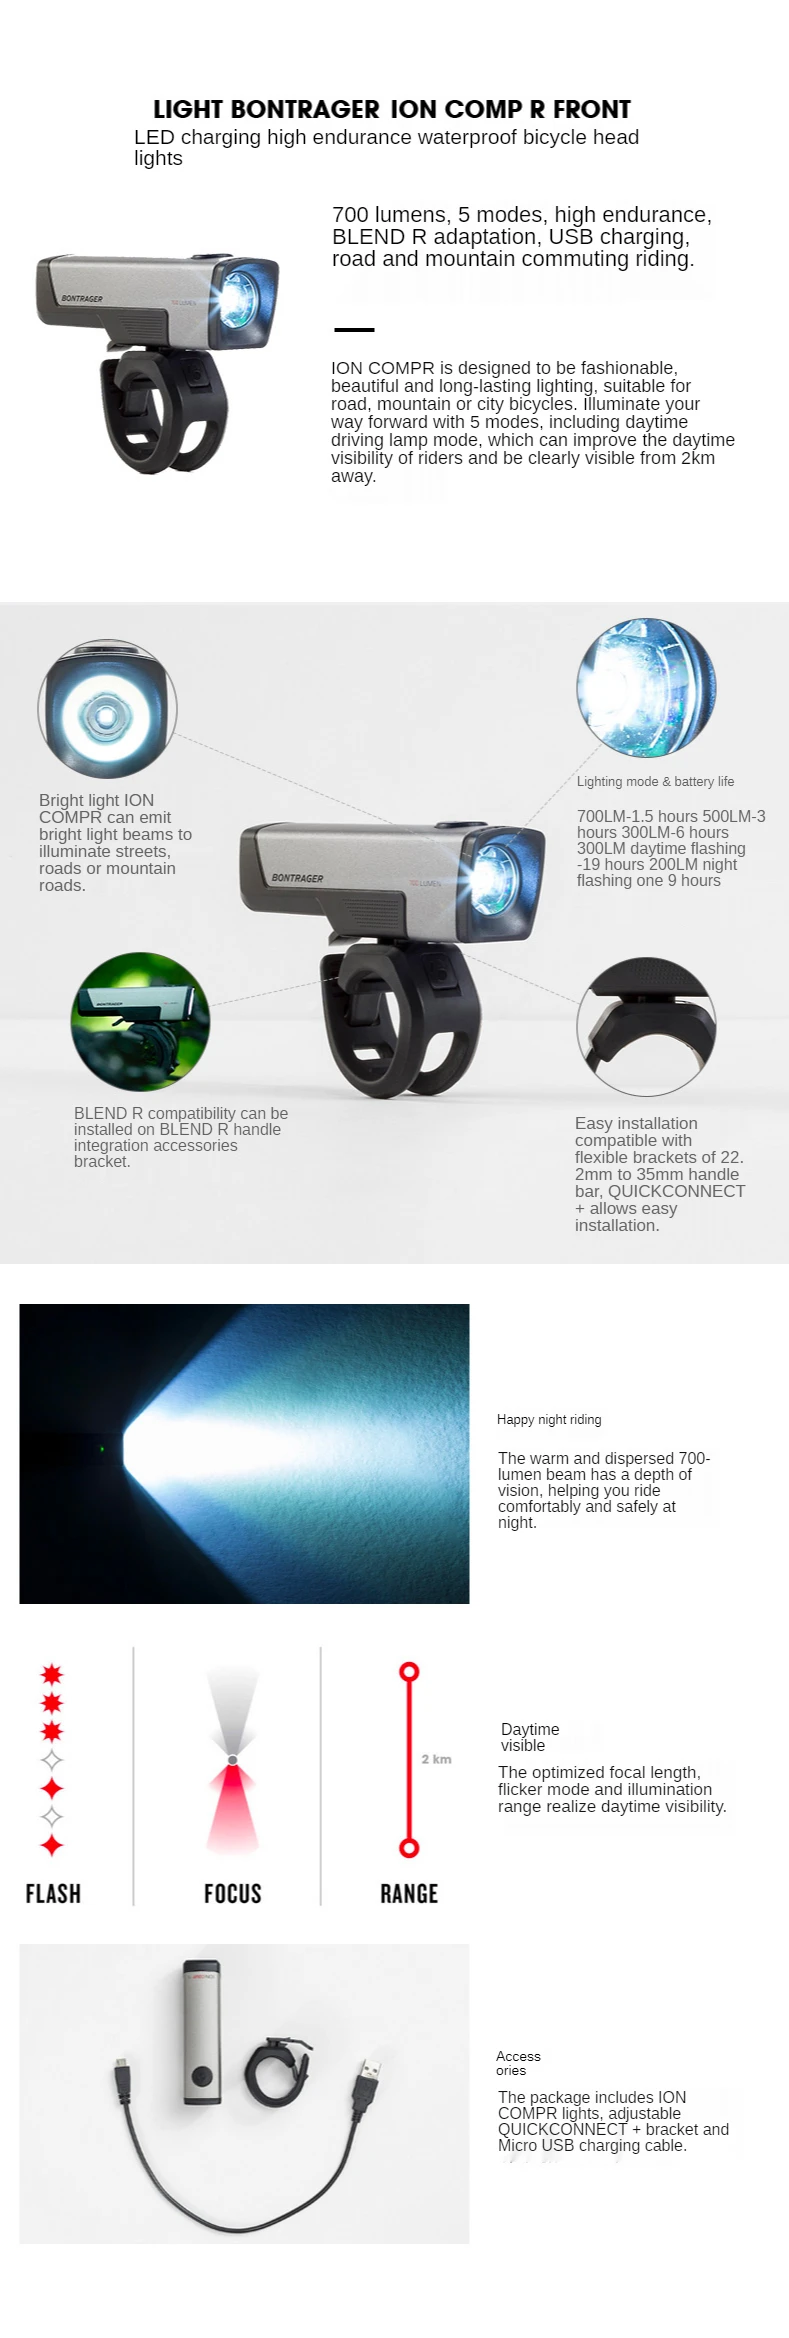 TREK Bontrager Ion Comp Charge R Bicycle Riding Day and Night Lights Before 700 Lumens LED Road Lamp